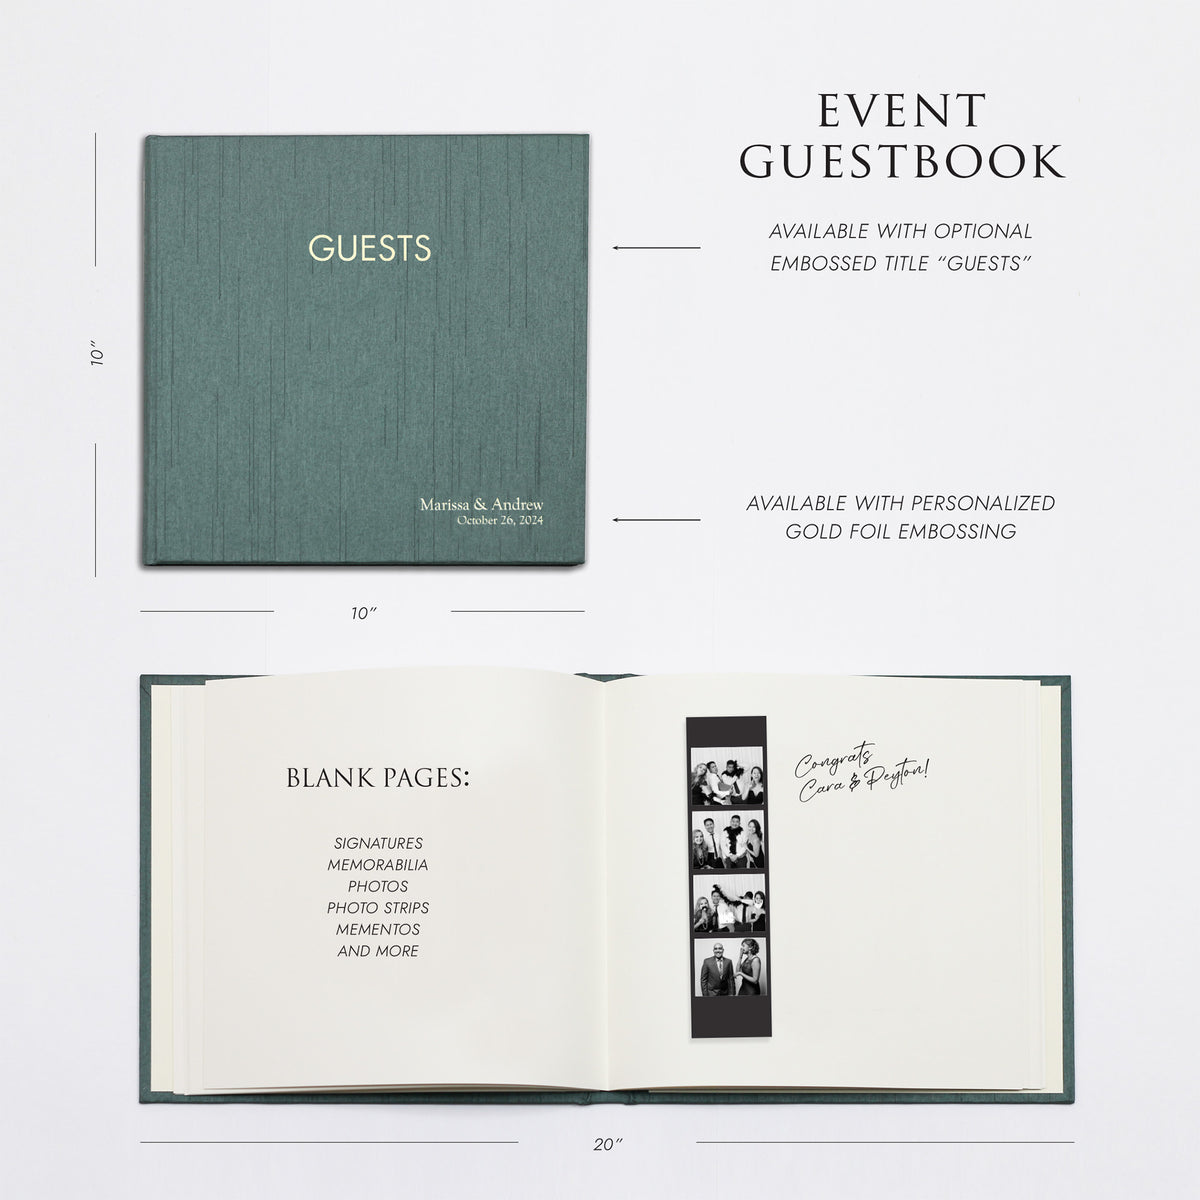 Event Guestbook Embossed with “Guests” with White Vegan Leather Cover